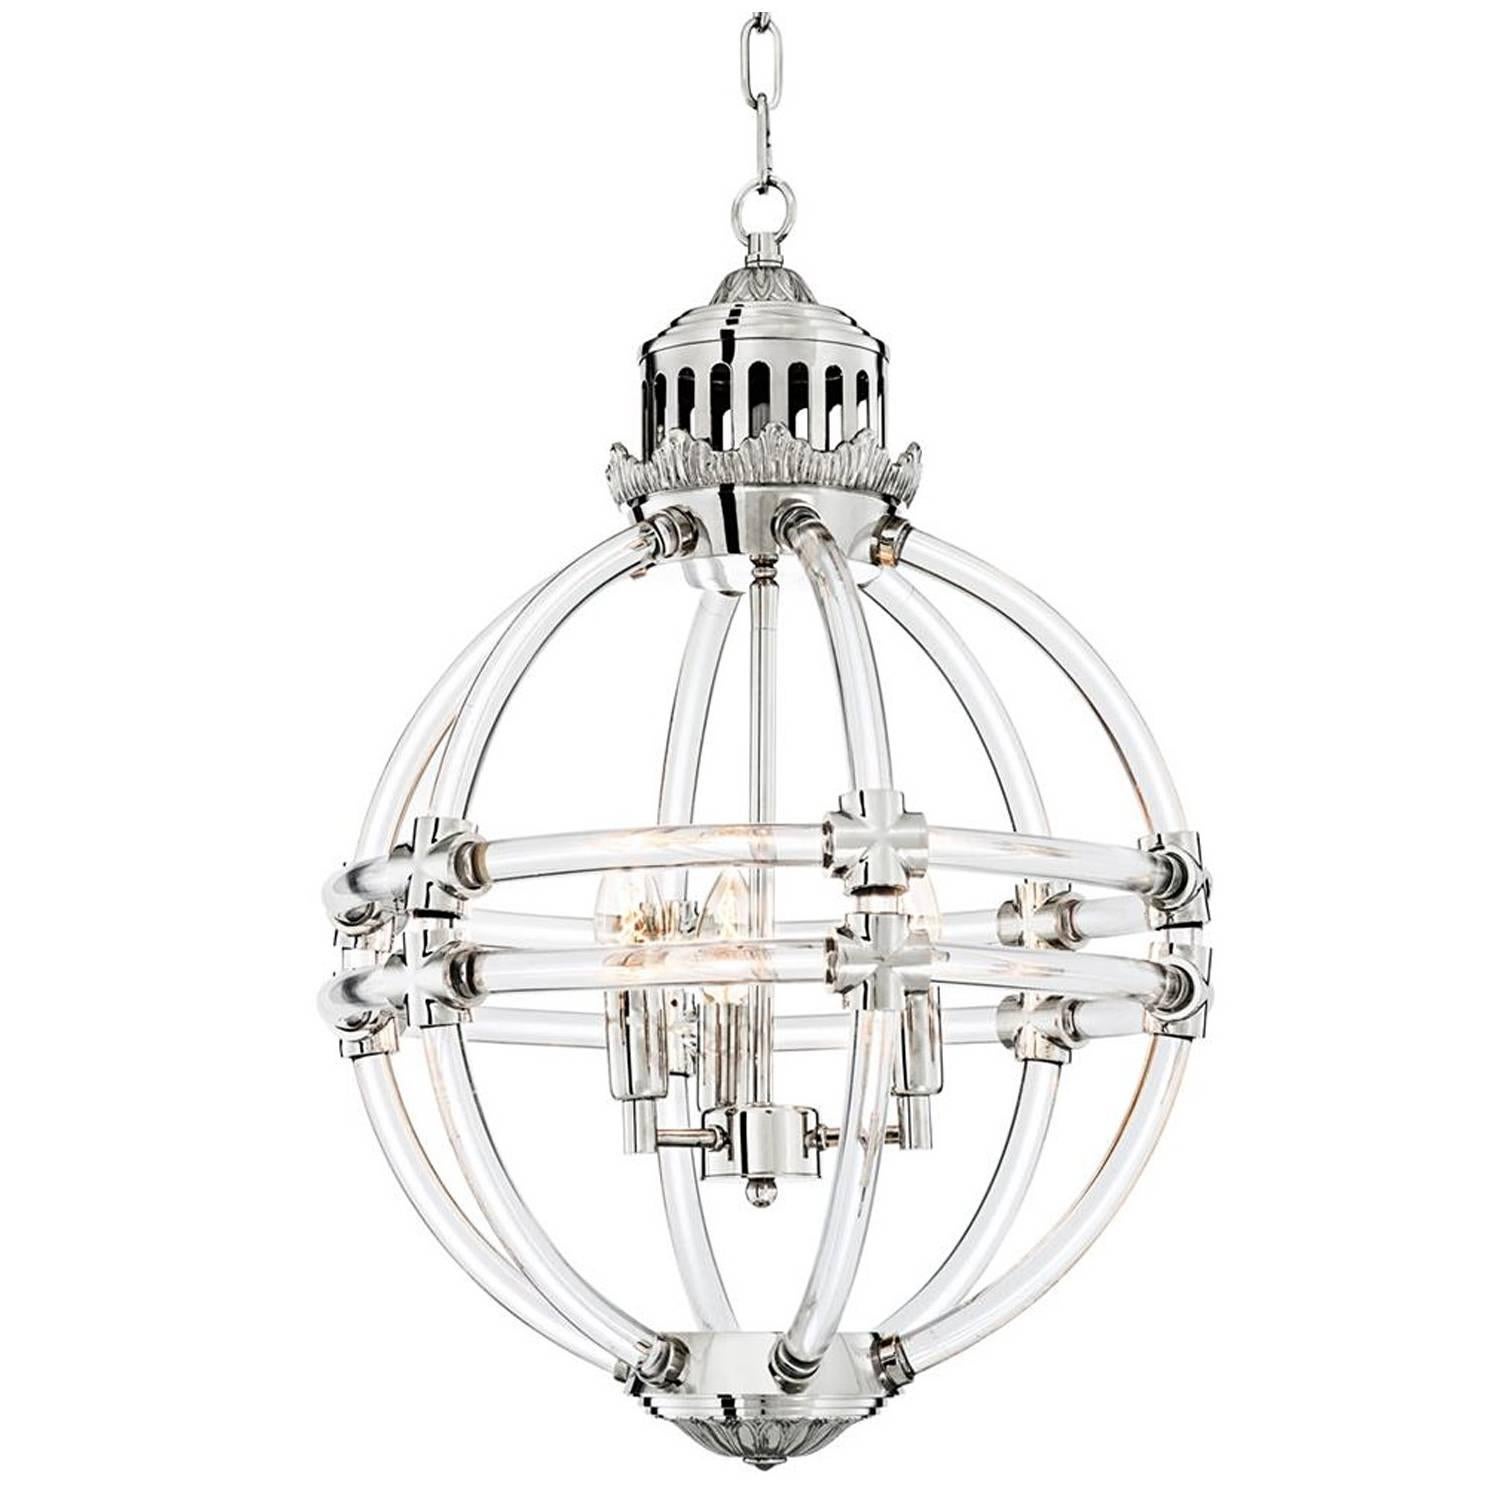 Empiro Chandelier in Clear Acrylic Glass and Nickel Finish